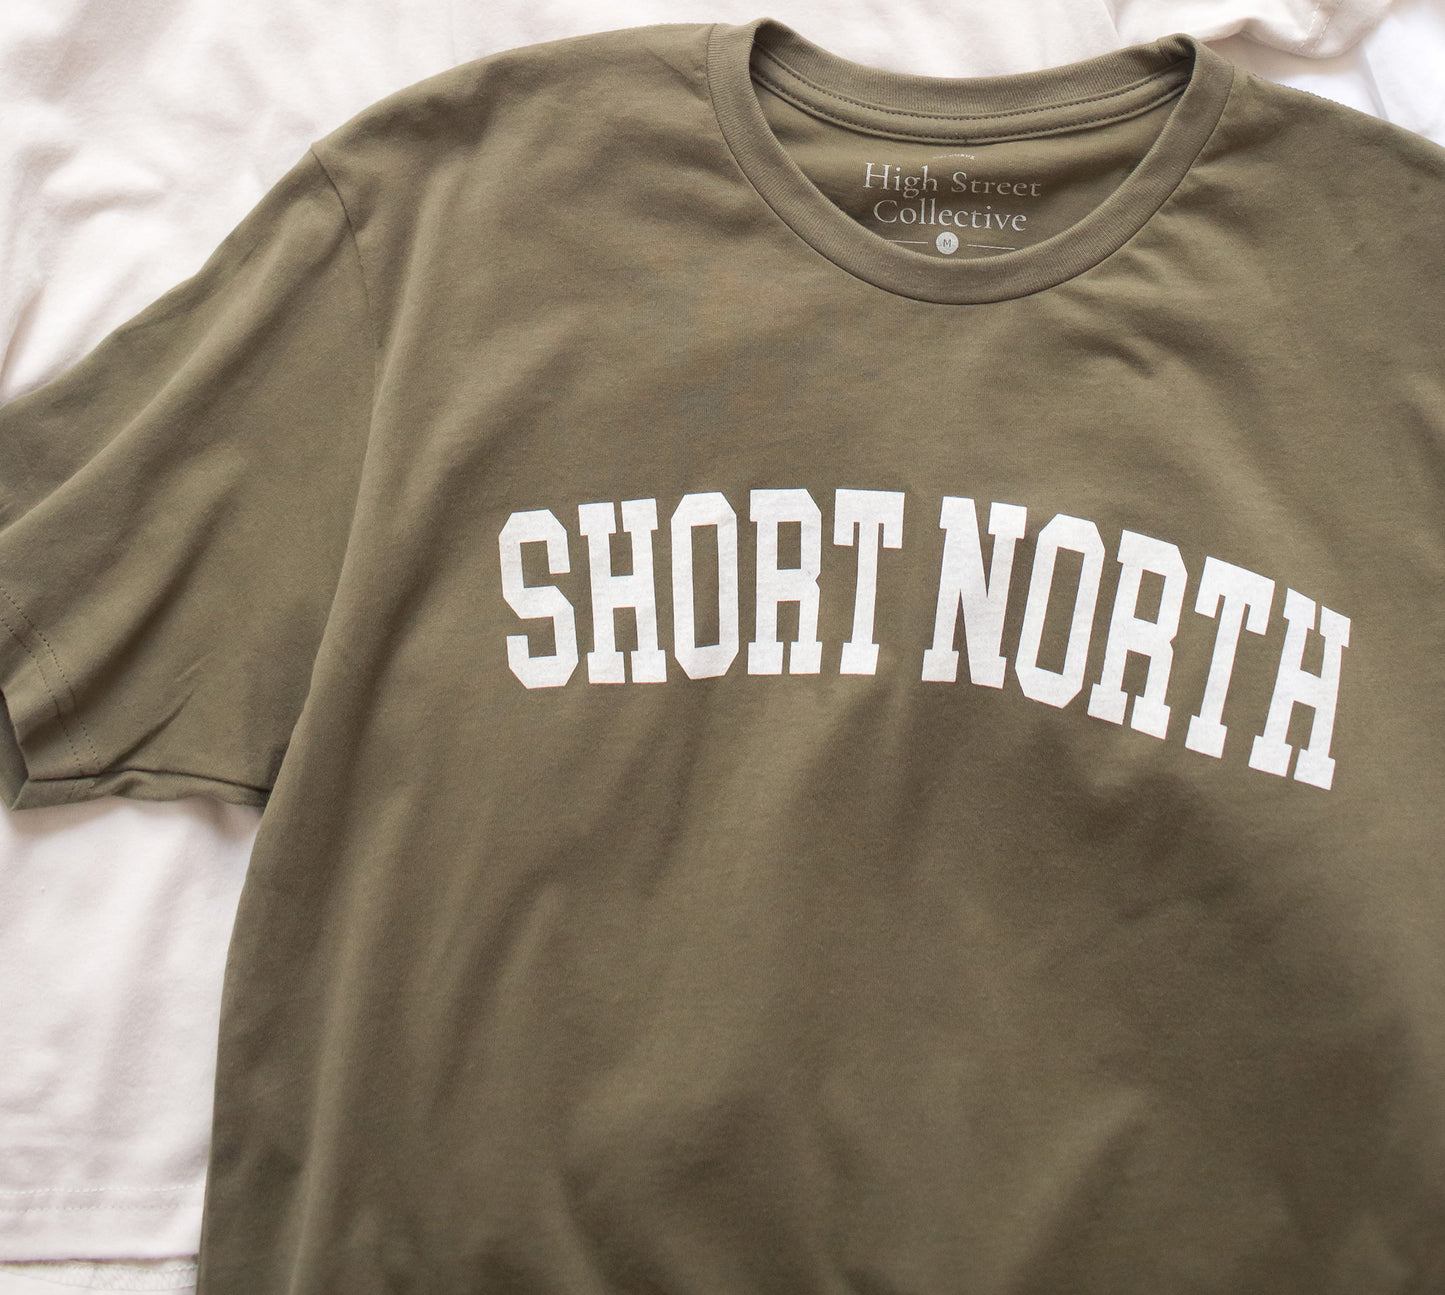 Dusty green sueded tee with white Short North graphic at front.